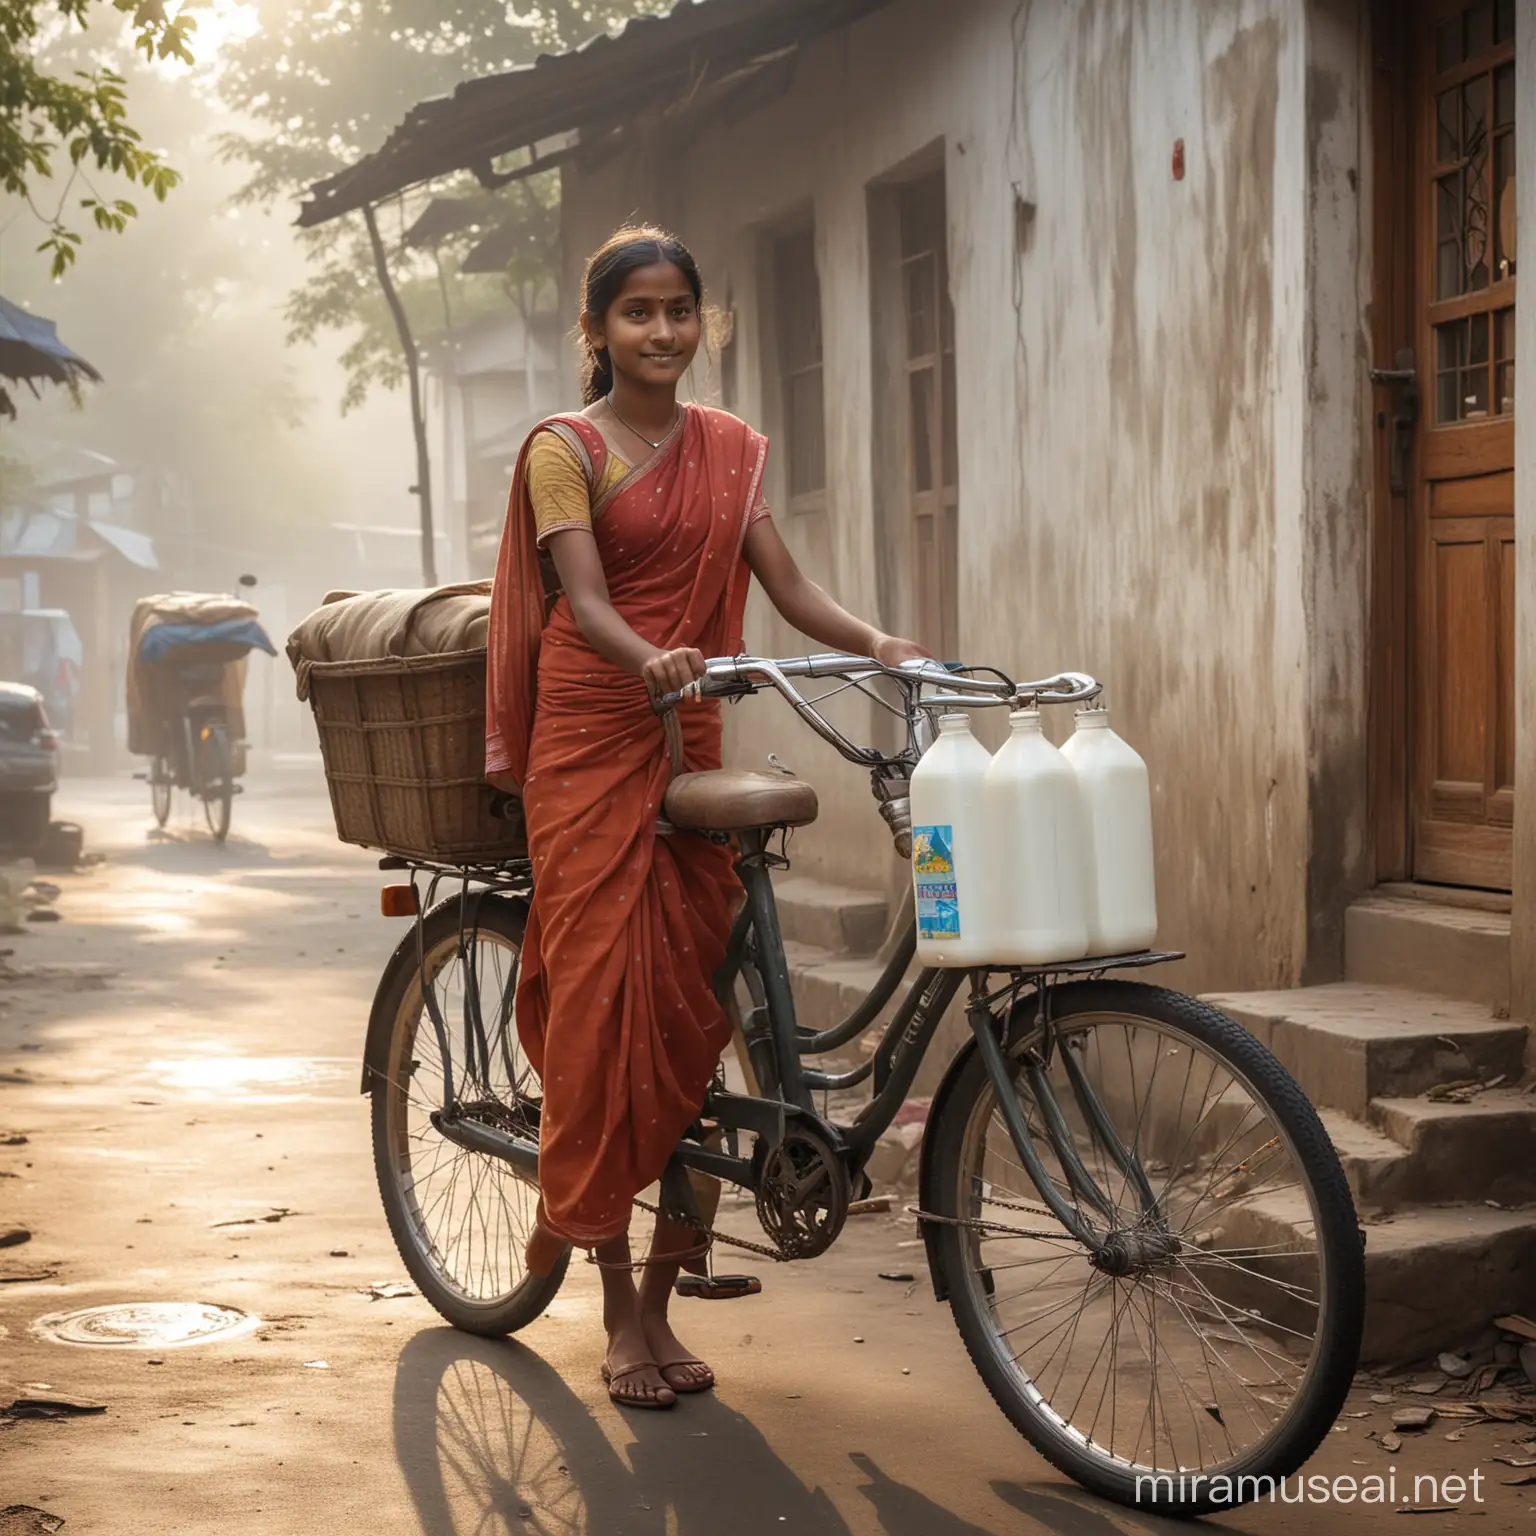 on a misty morning, an Indian man is delivering milk, to a house in the city. The milk is in a large container attached to the back of his bicycle. A 6 year old little beautiful indian girl, from the house, is receiving the milk in a container. The man is pouring the milk into the girl's utensil. the facial features must be very clear. the main focus is the man and the girl. Detailed, vivid colors.